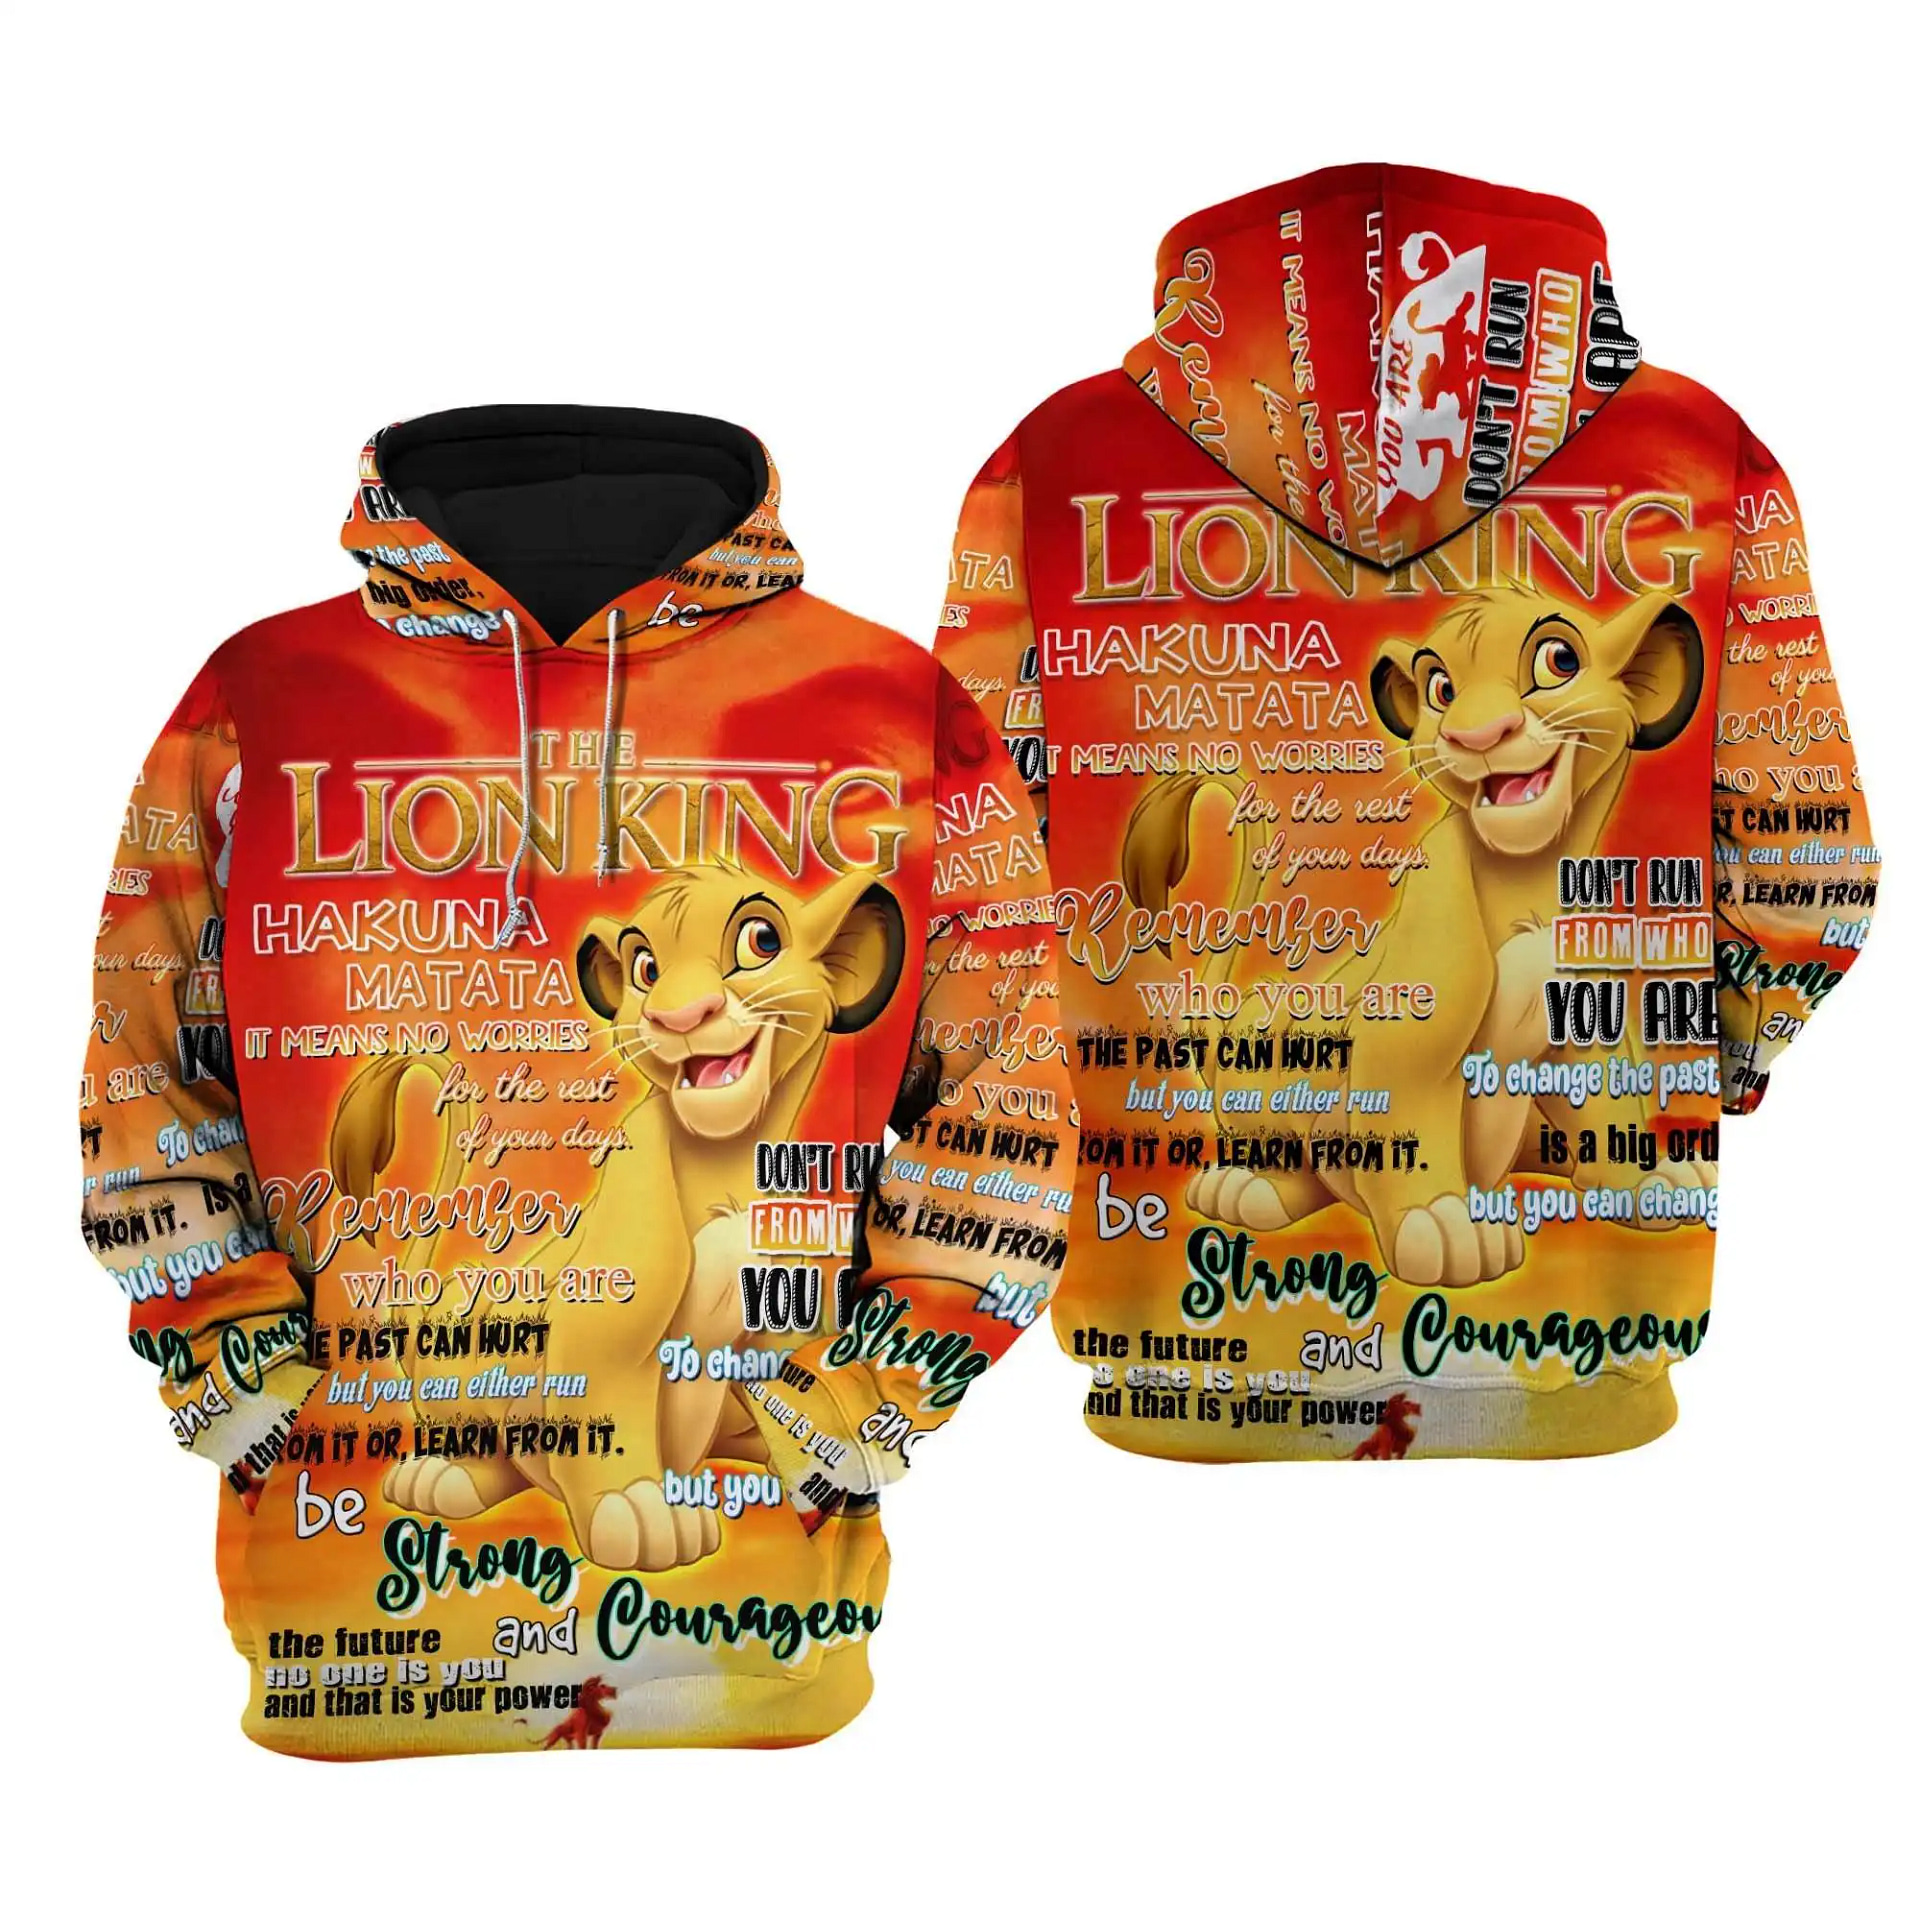 Lion King Punk Words Pattern Disney Quotes Cartoon Graphic Outfits Clothing Men Women Kids Toddlers Hoodie 3D